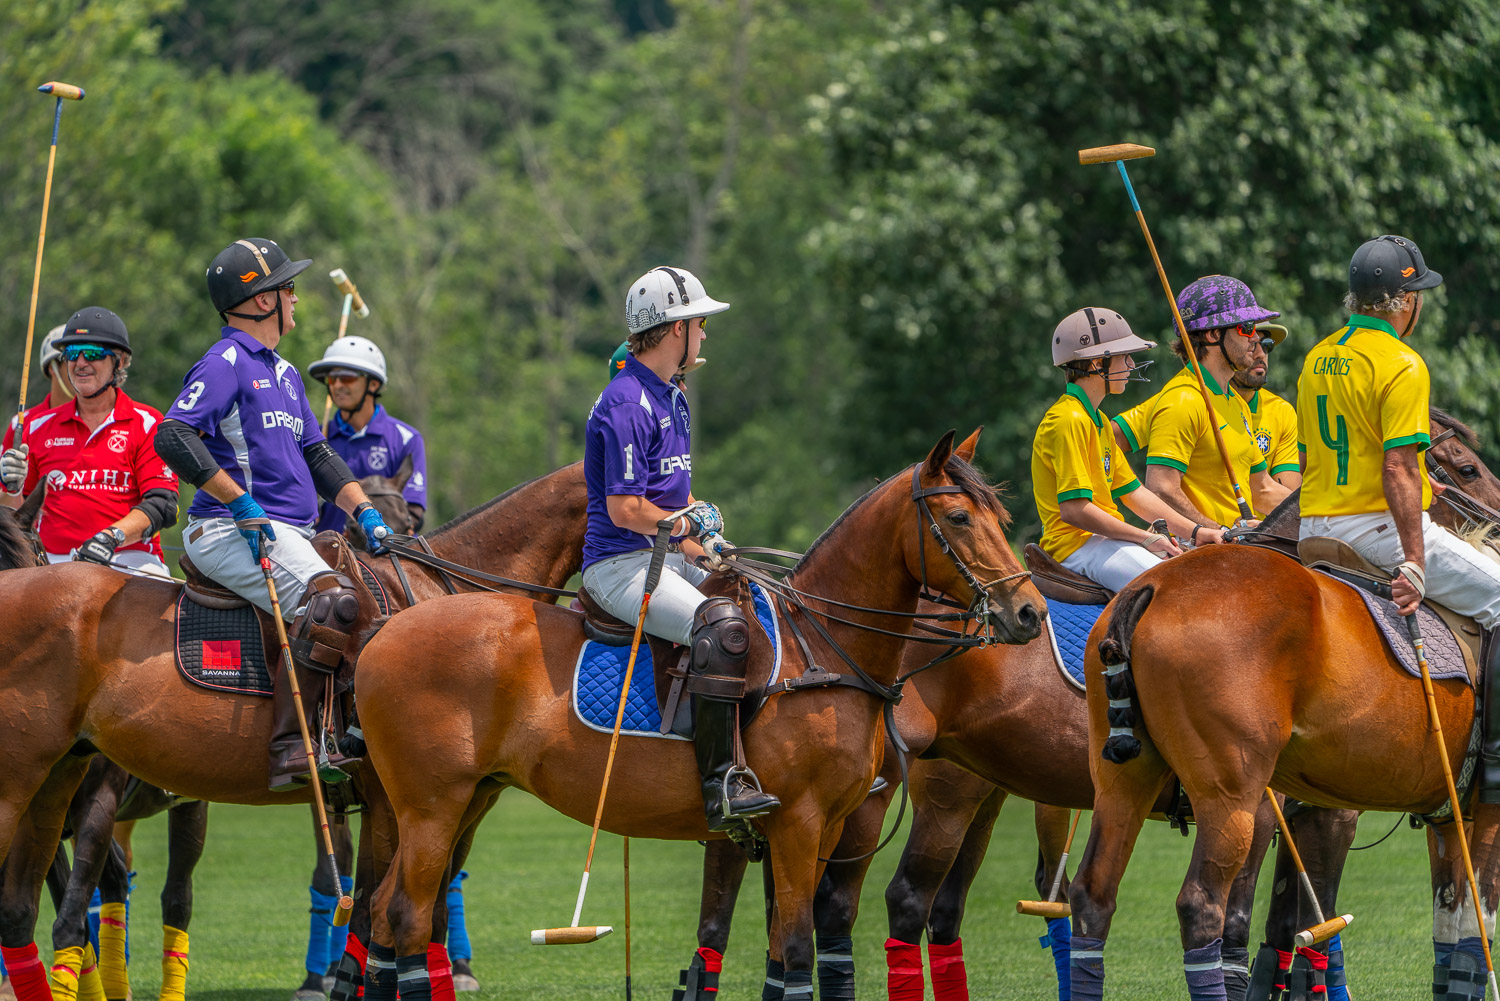 Polo players and their ponies at the start of Mashomack polo match.jpg